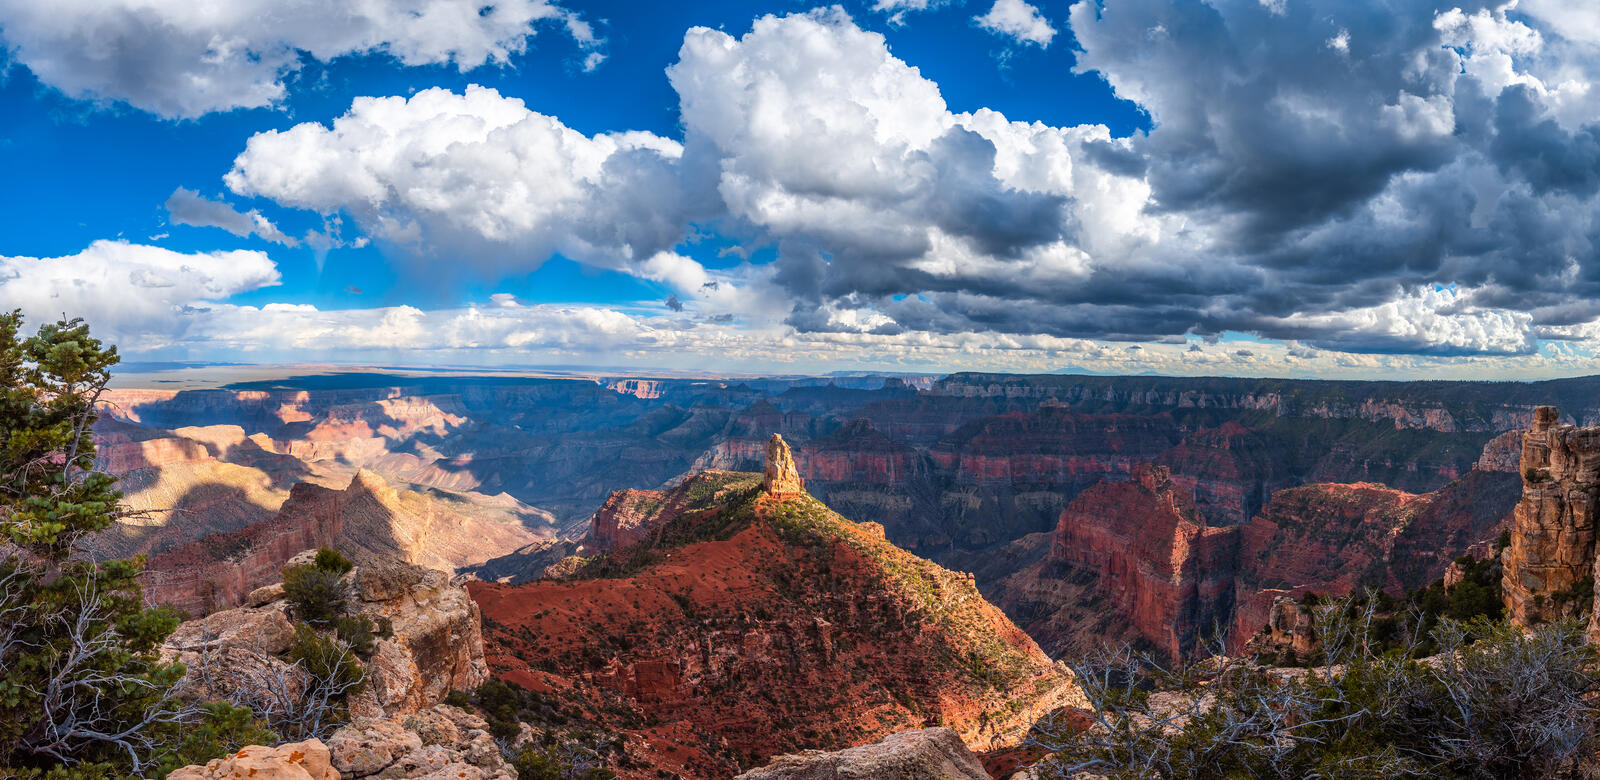 Wallpapers nature grand canyon park USA on the desktop